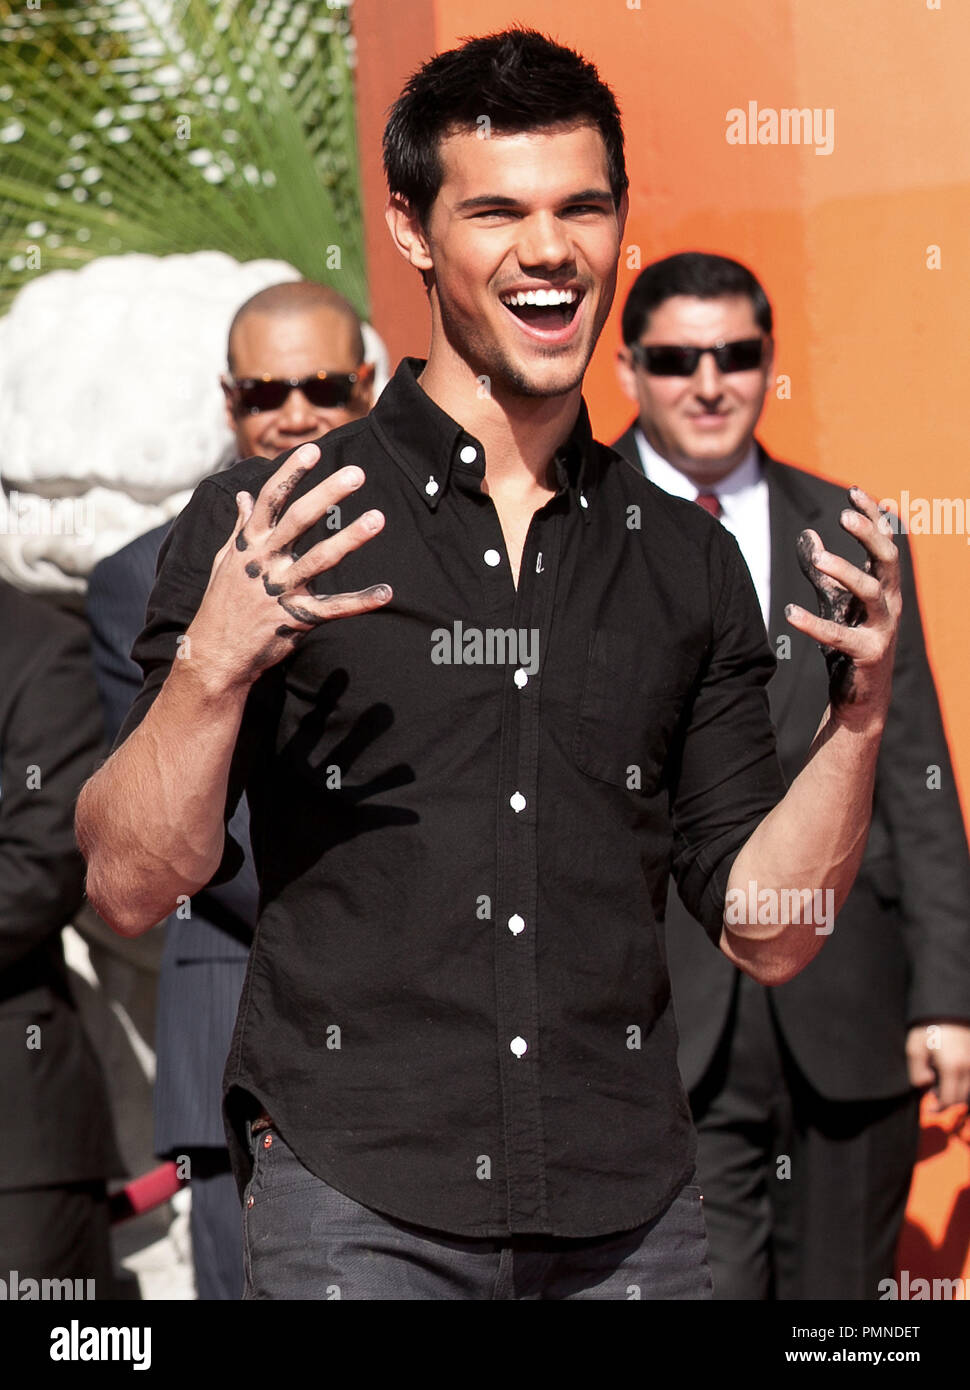 Taylor Lautner at the 'Twilight' Trio Robert Pattinson, Kristen Stewart and Taylor Lautner Hand And Footprint Ceremony held at Grauman's Mann Chinese Theatre in Hollywood, CA. The event took place on Thursday, November 3, 2011. Photo by John Salangsang/ PRPP/ PictureLux Stock Photo